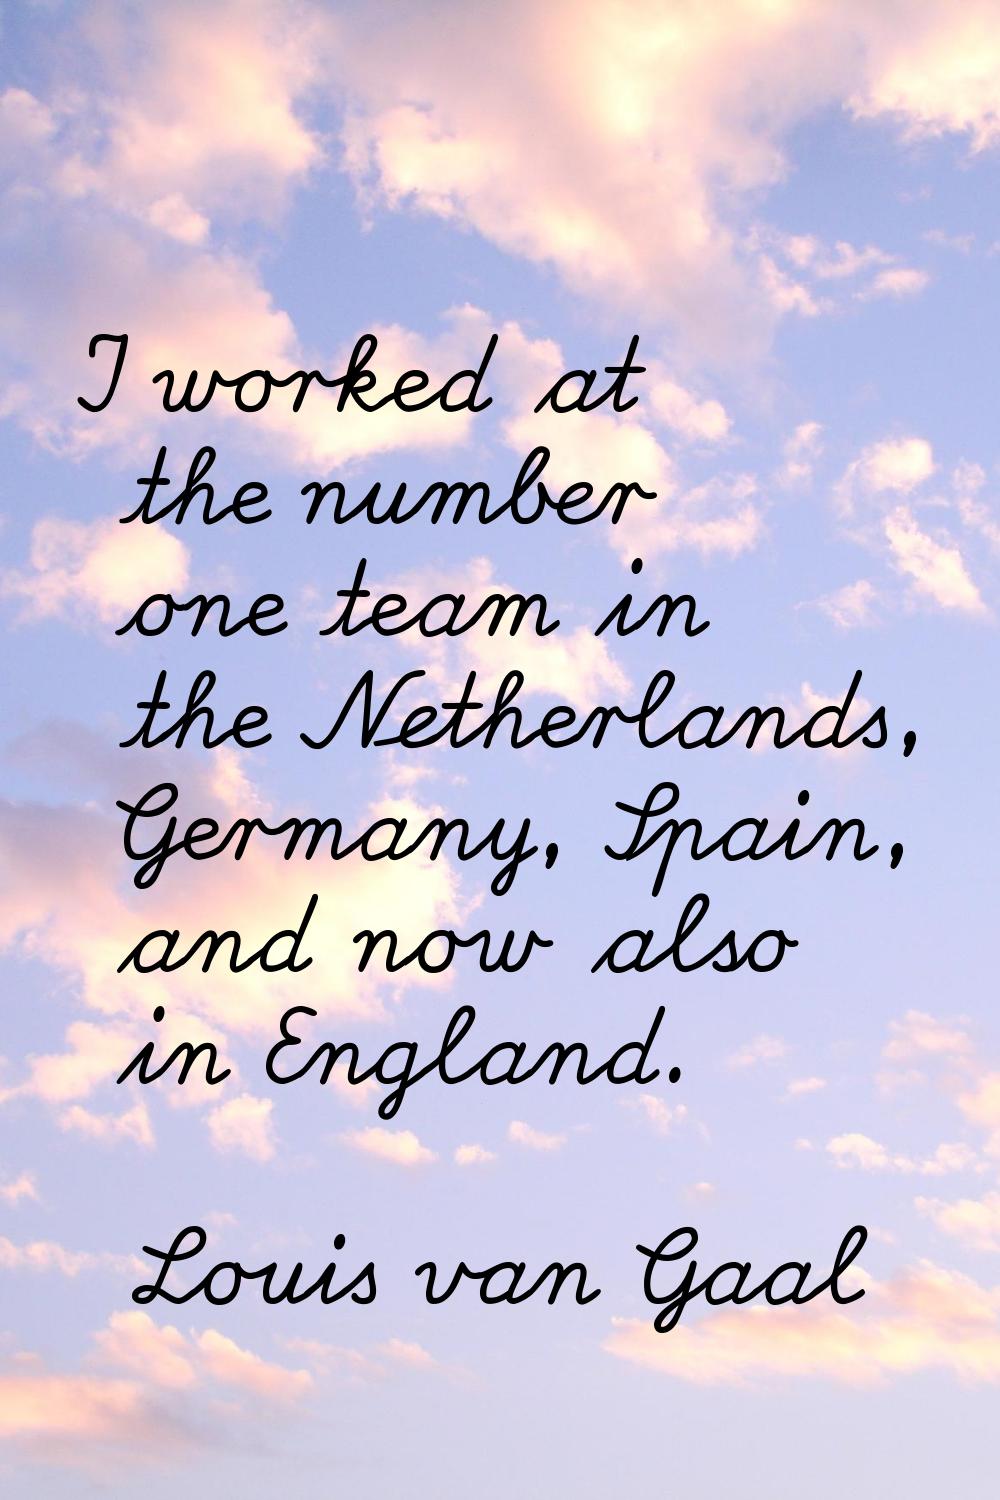 I worked at the number one team in the Netherlands, Germany, Spain, and now also in England.